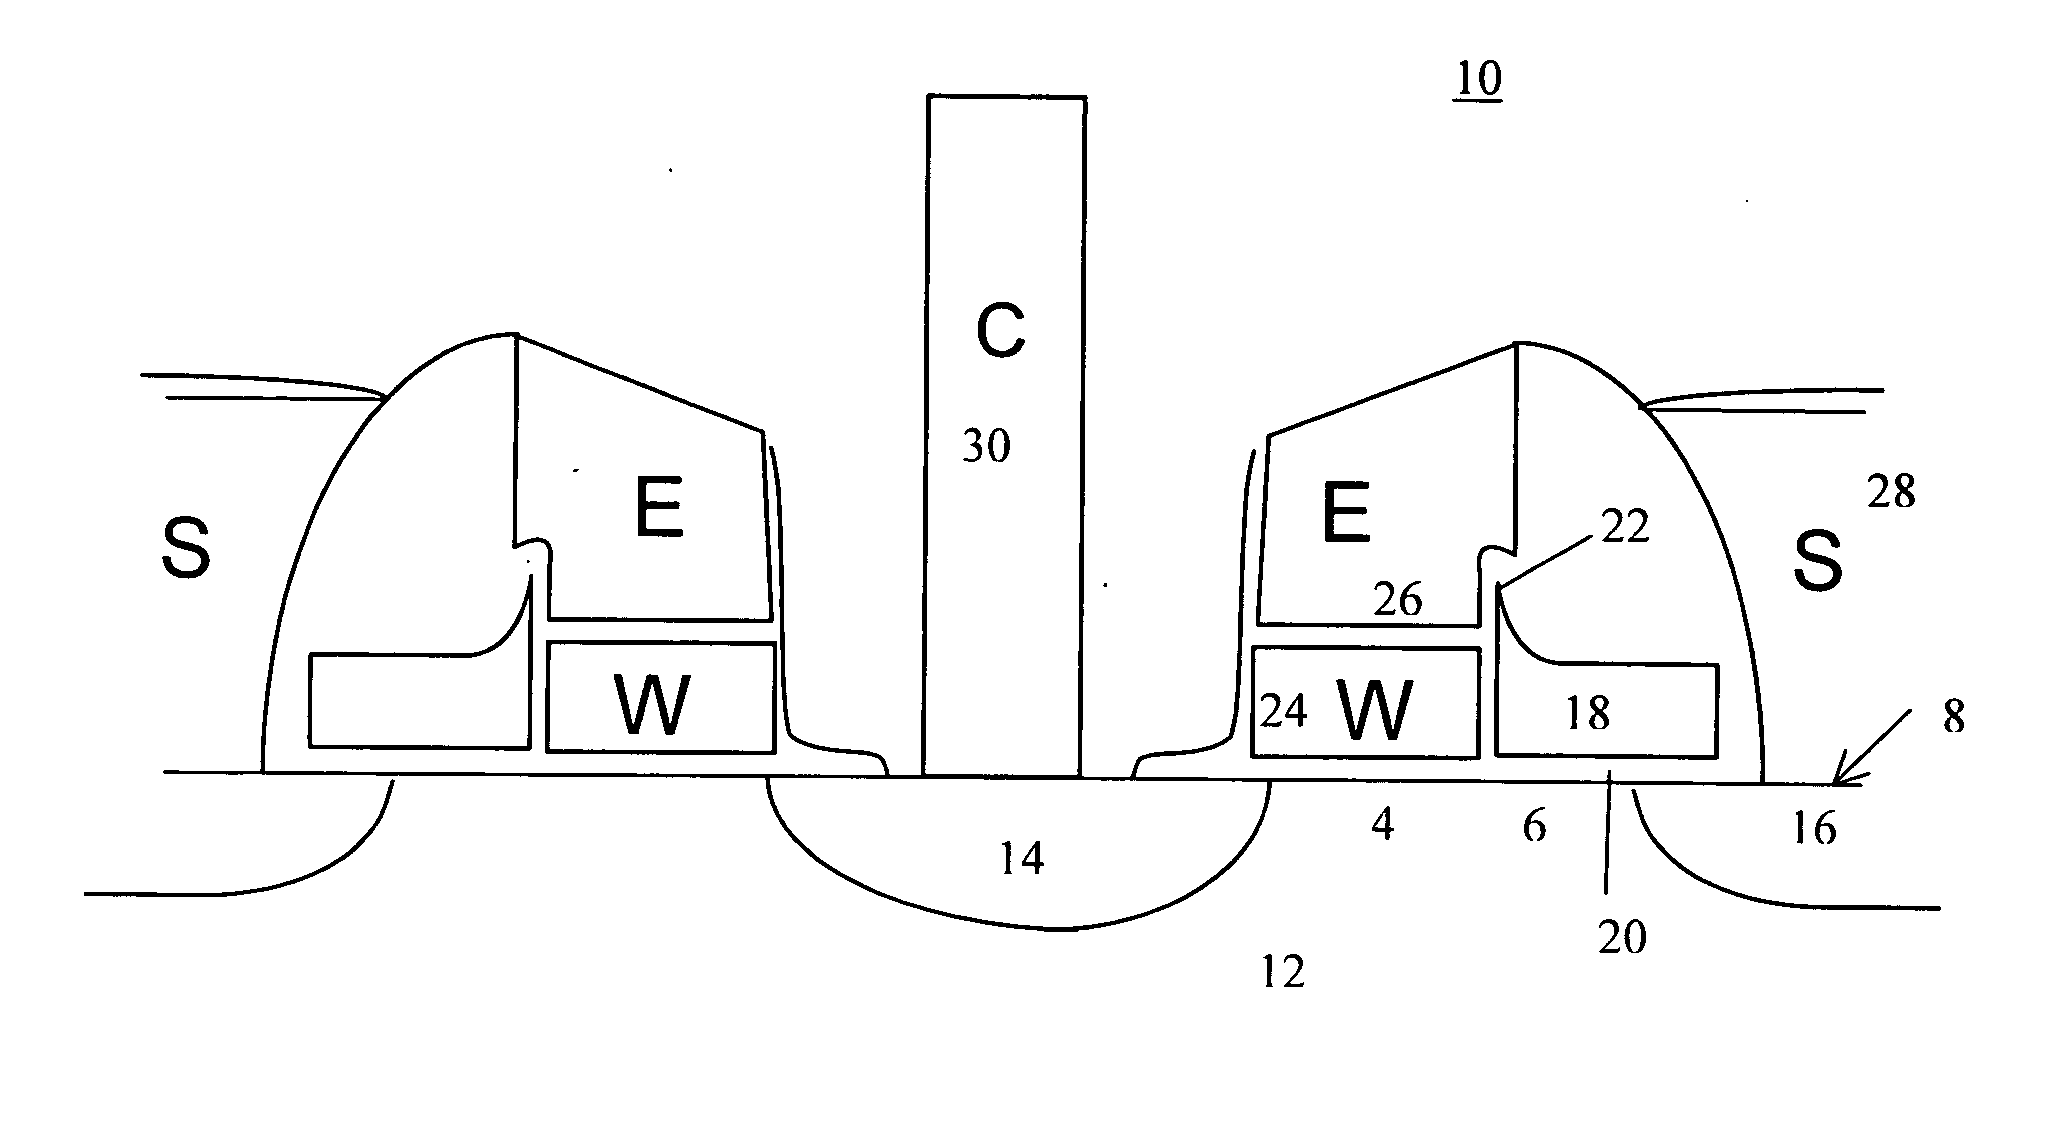 Nonvolatile memory cell having floating gate, control gate and separate erase gate, an array of such memory cells, and method of manufacturing